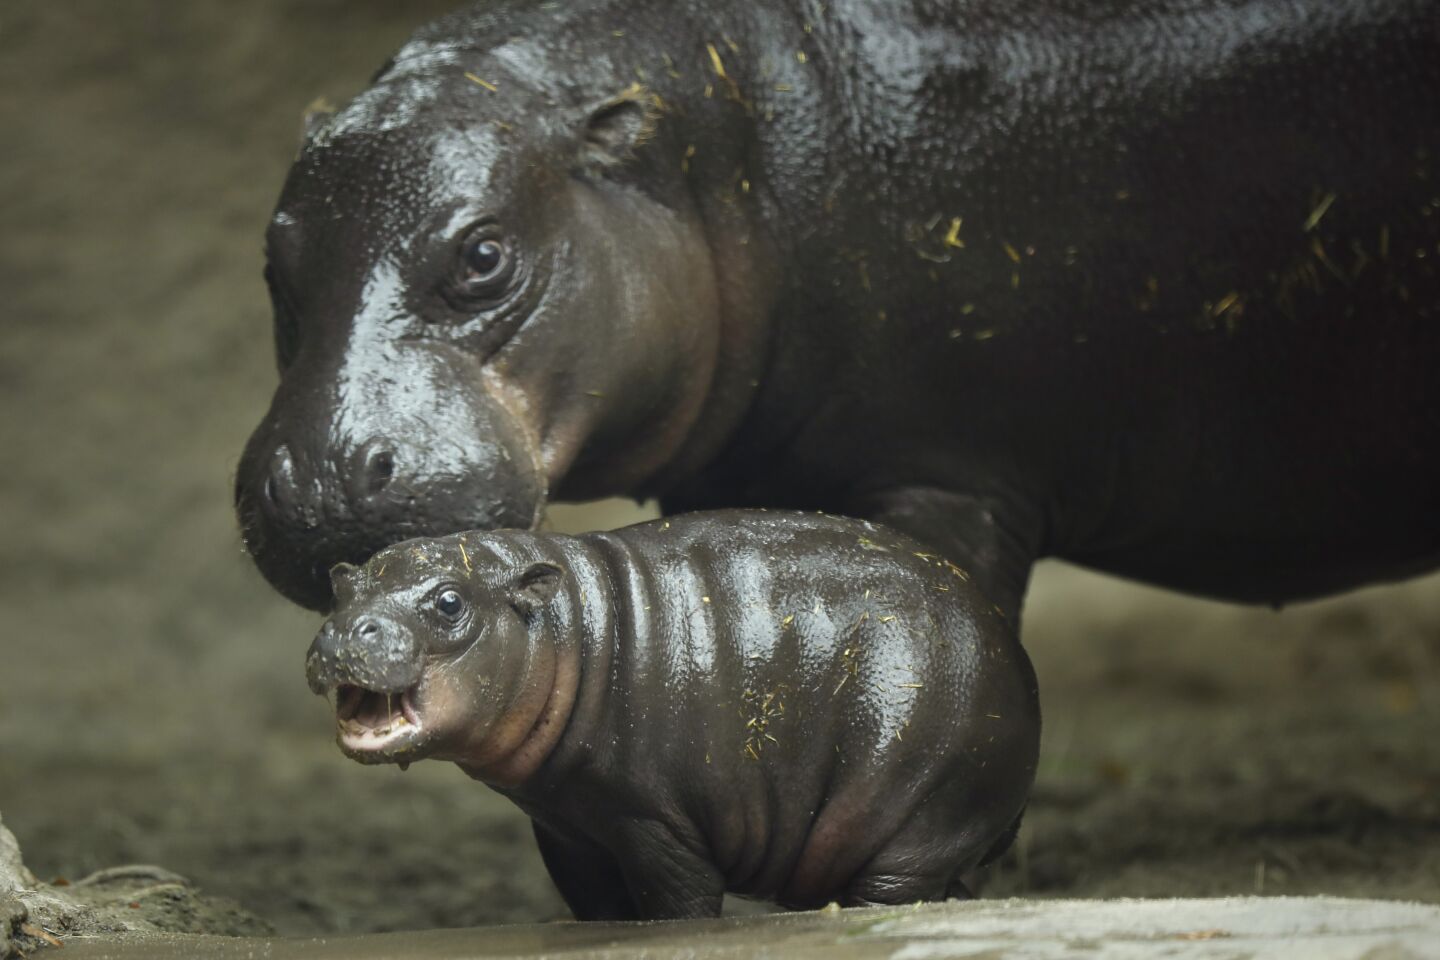 Akobi, a 40-pound, 67-day-old pygmy hippopotamus, walks with his mom Mabel into the water at the San Diego Zoo on June 15, 2020. Akobi was introduced to the public for the first time as it explored the main exhibit for the first time Monday.